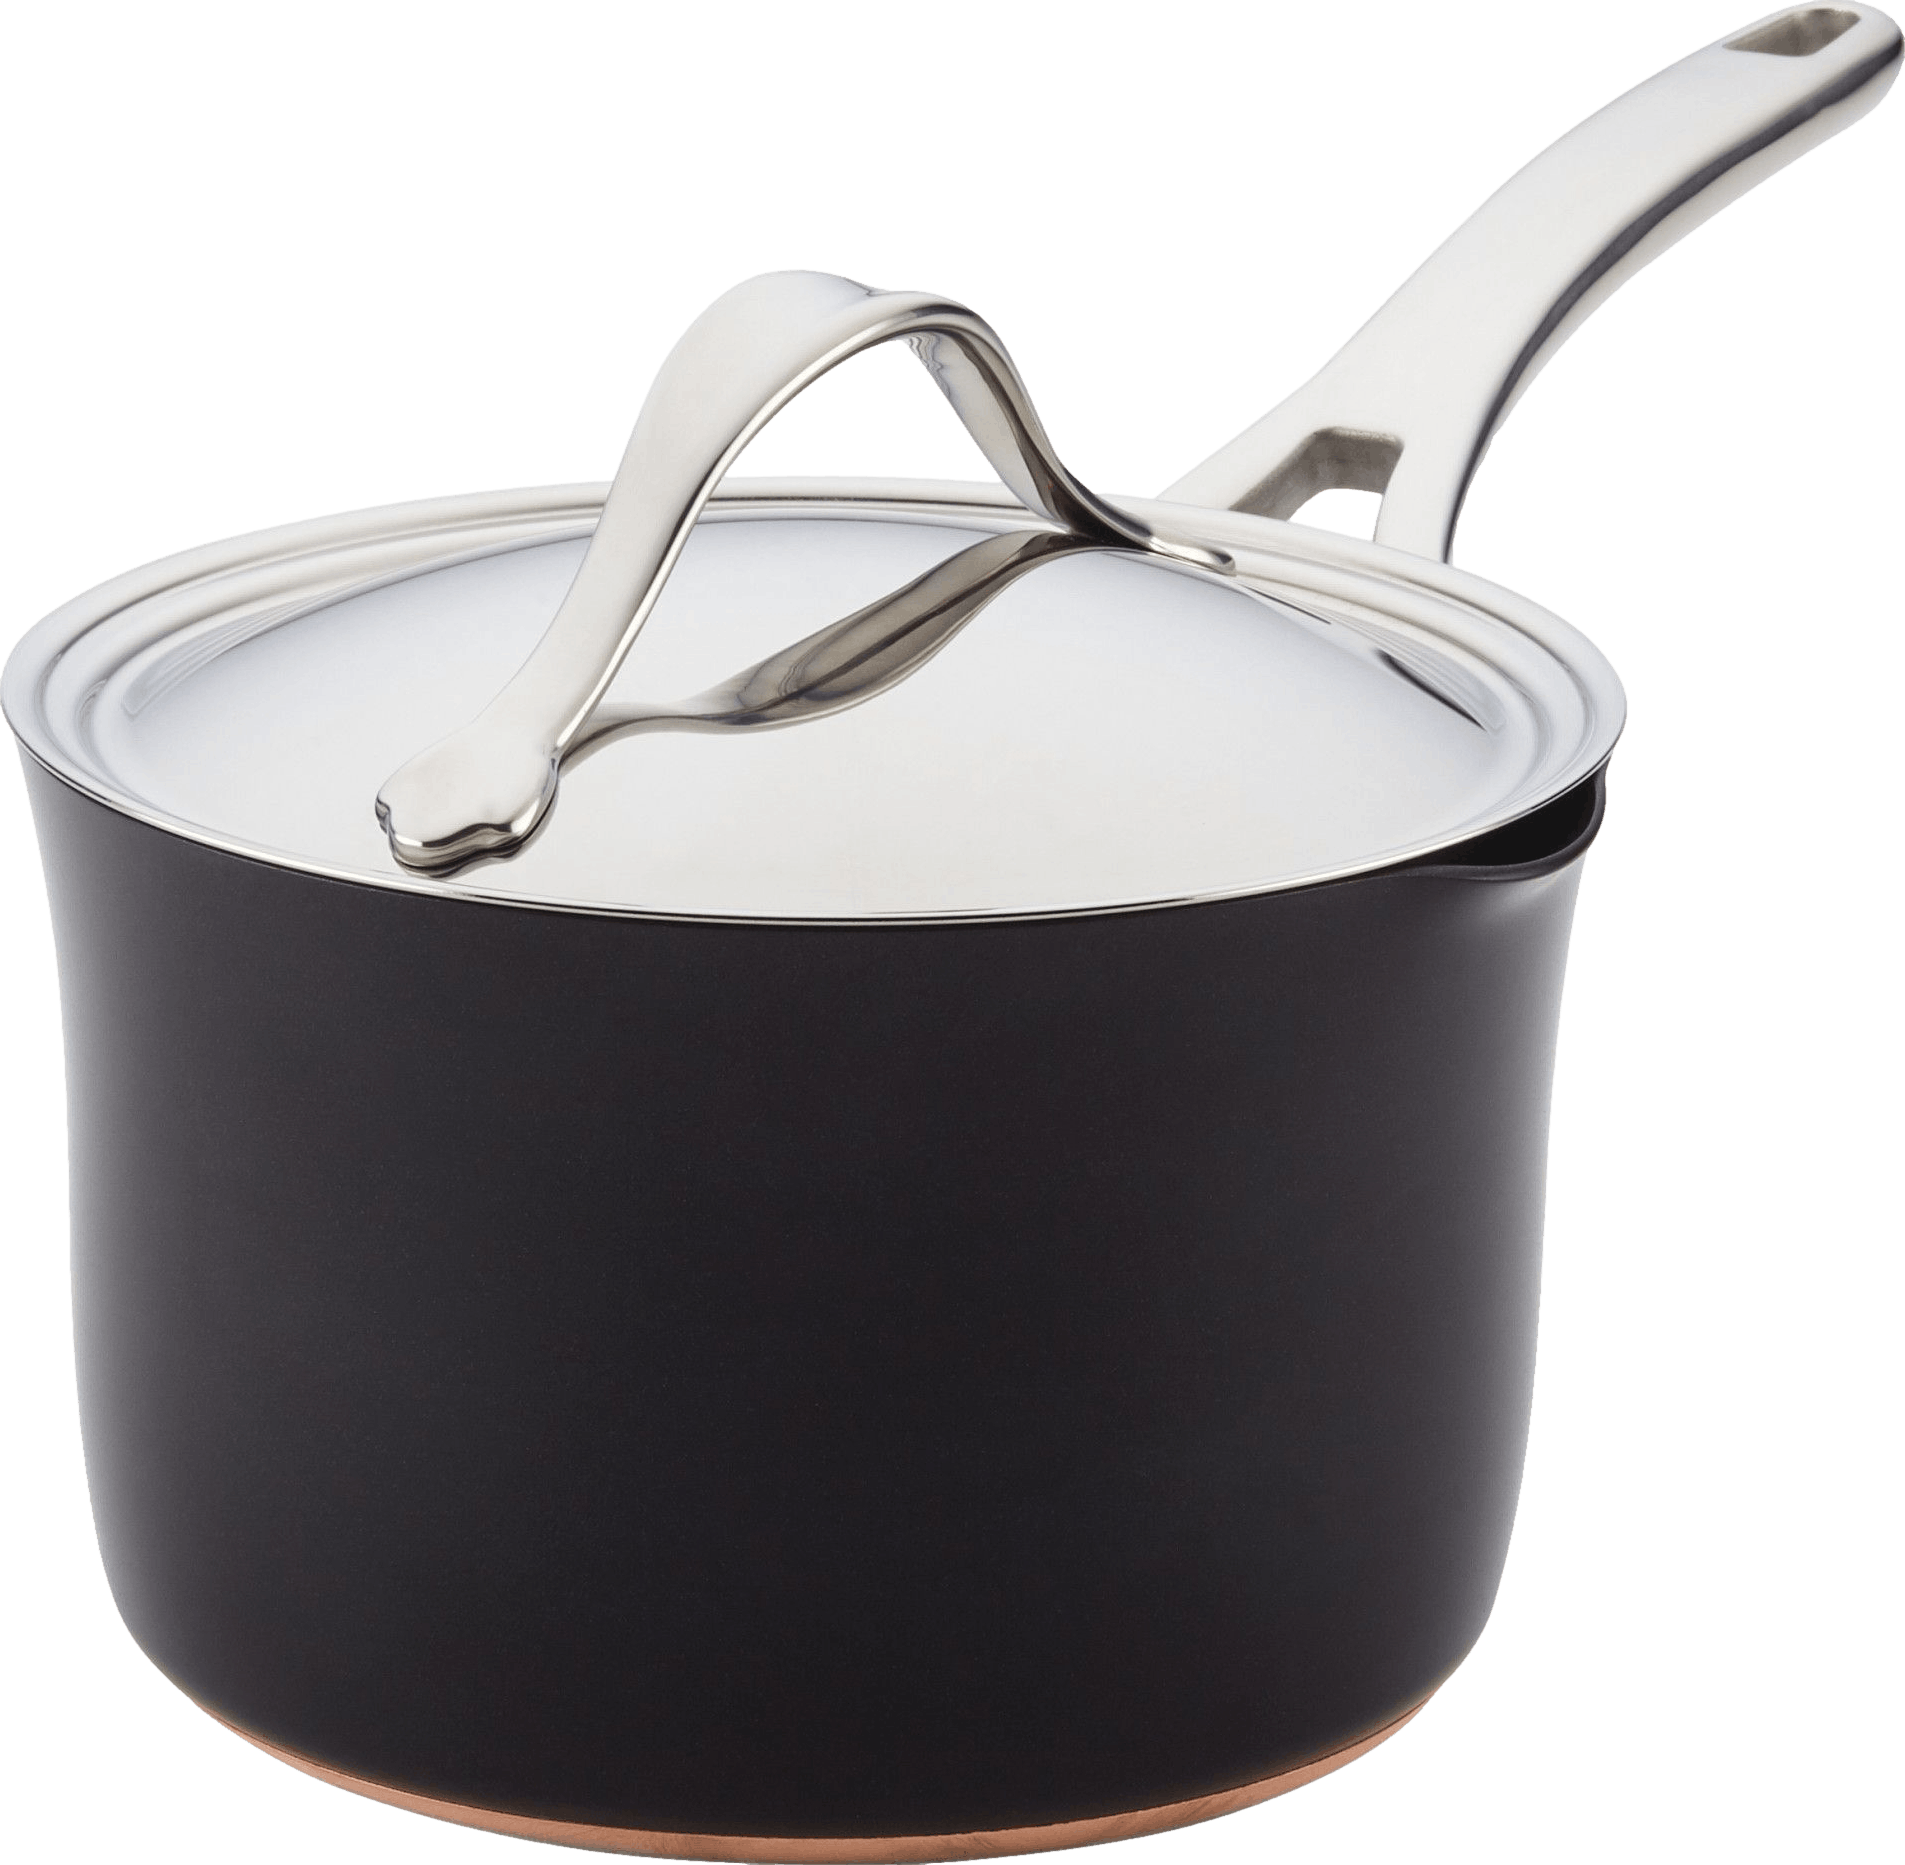 Viking Hard Anodized Nonstick Sauce Pan with Lid, 2-Quart